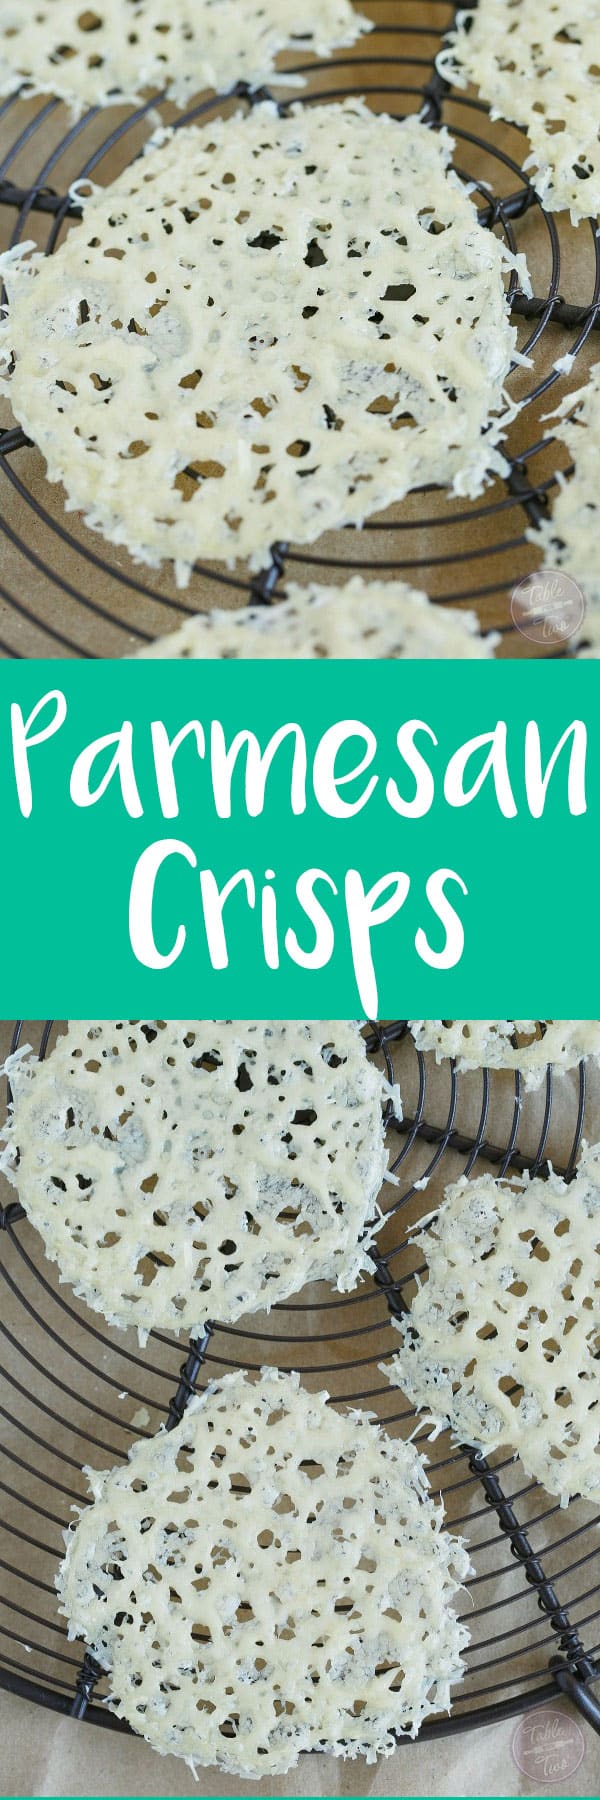 Parmesan crisps are the easiest and best salad or soup toppers ever! It gives your dish that extra cheesy crunch! You'll find any excuse to make and use these guys!